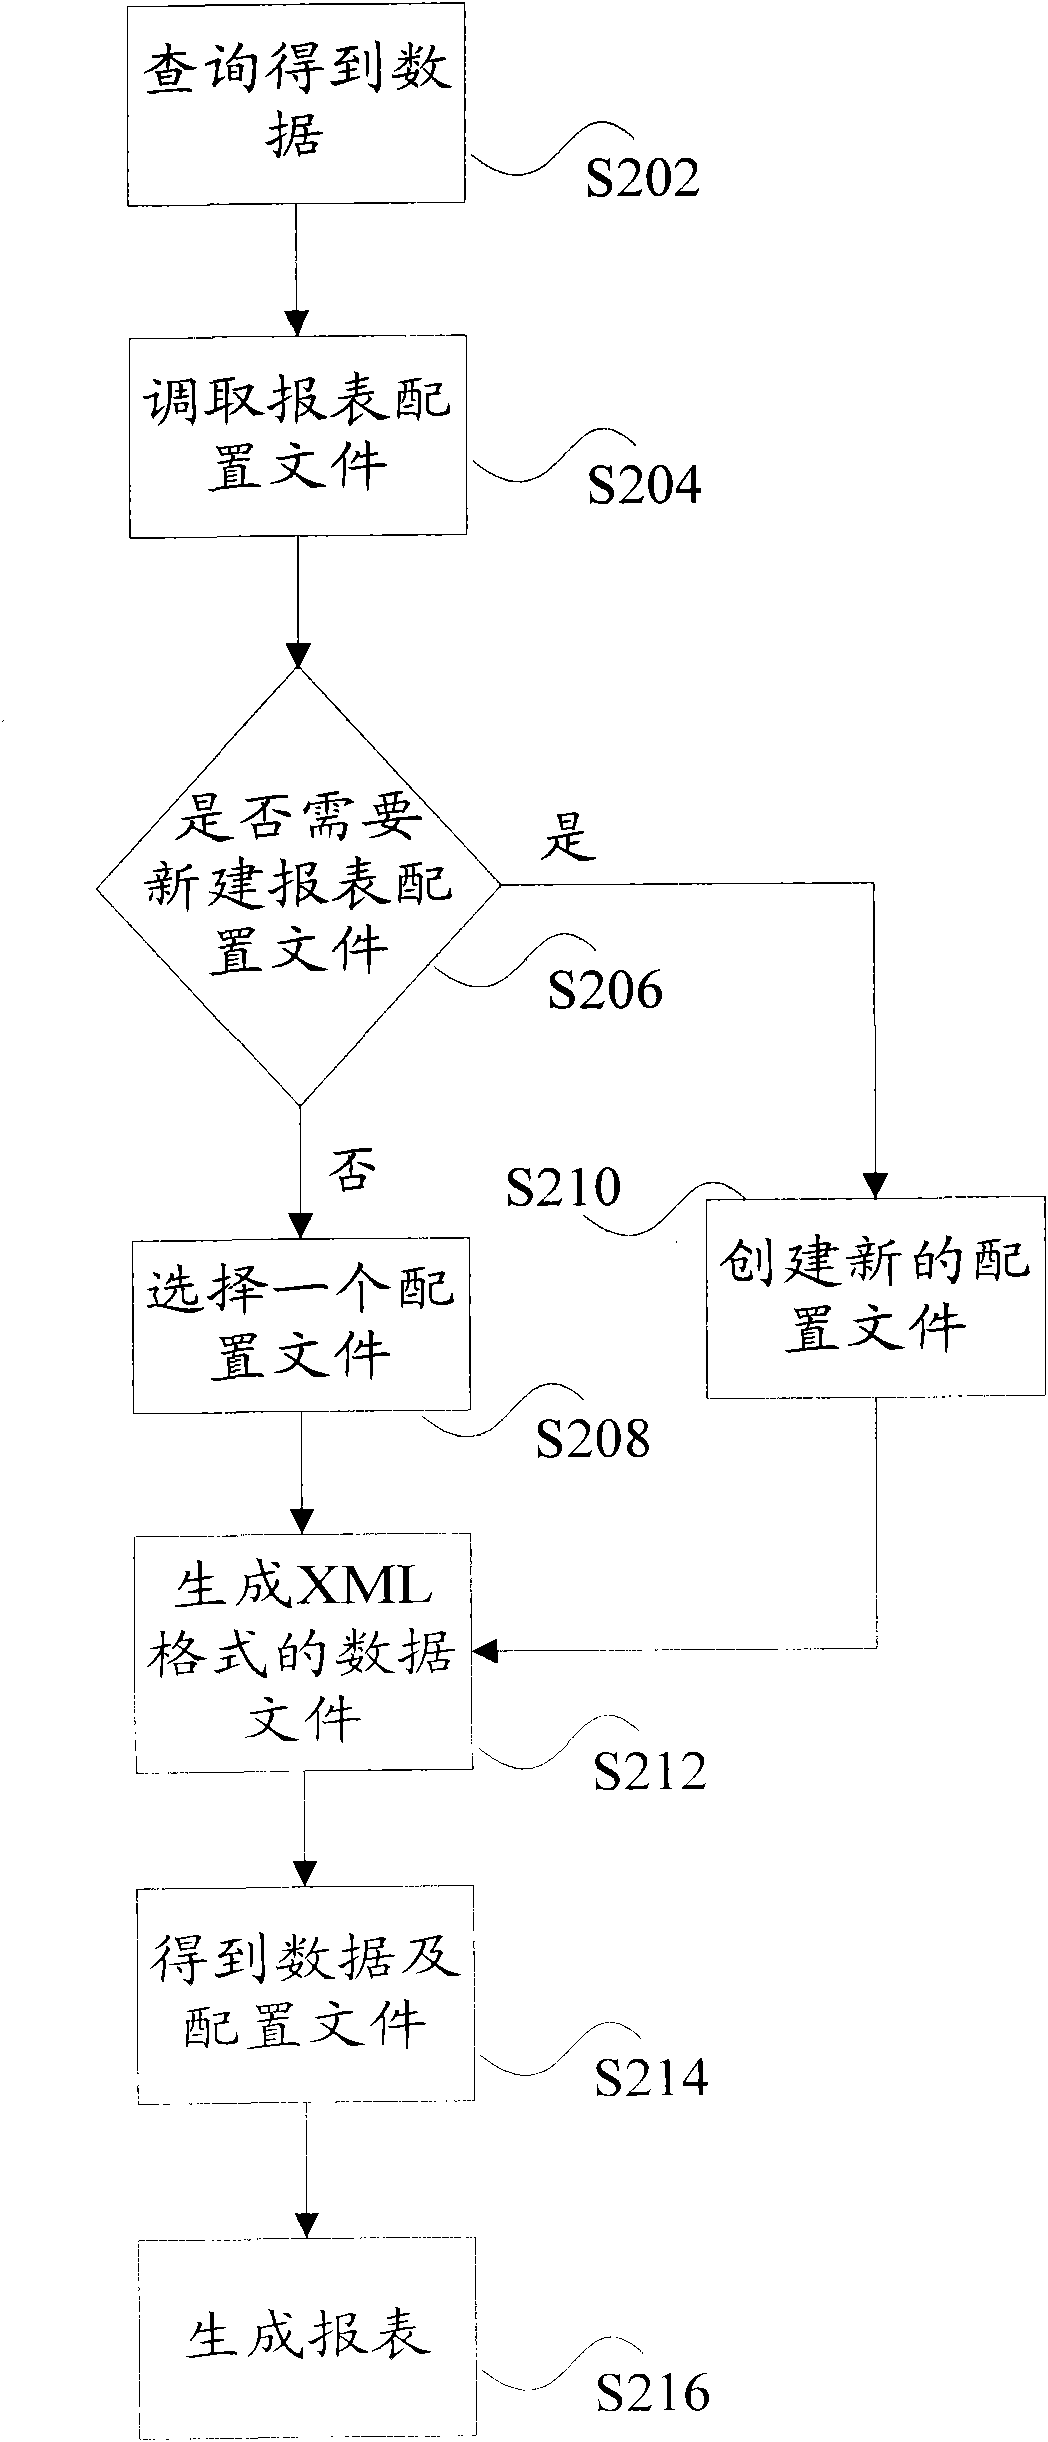 Method and system for exporting data